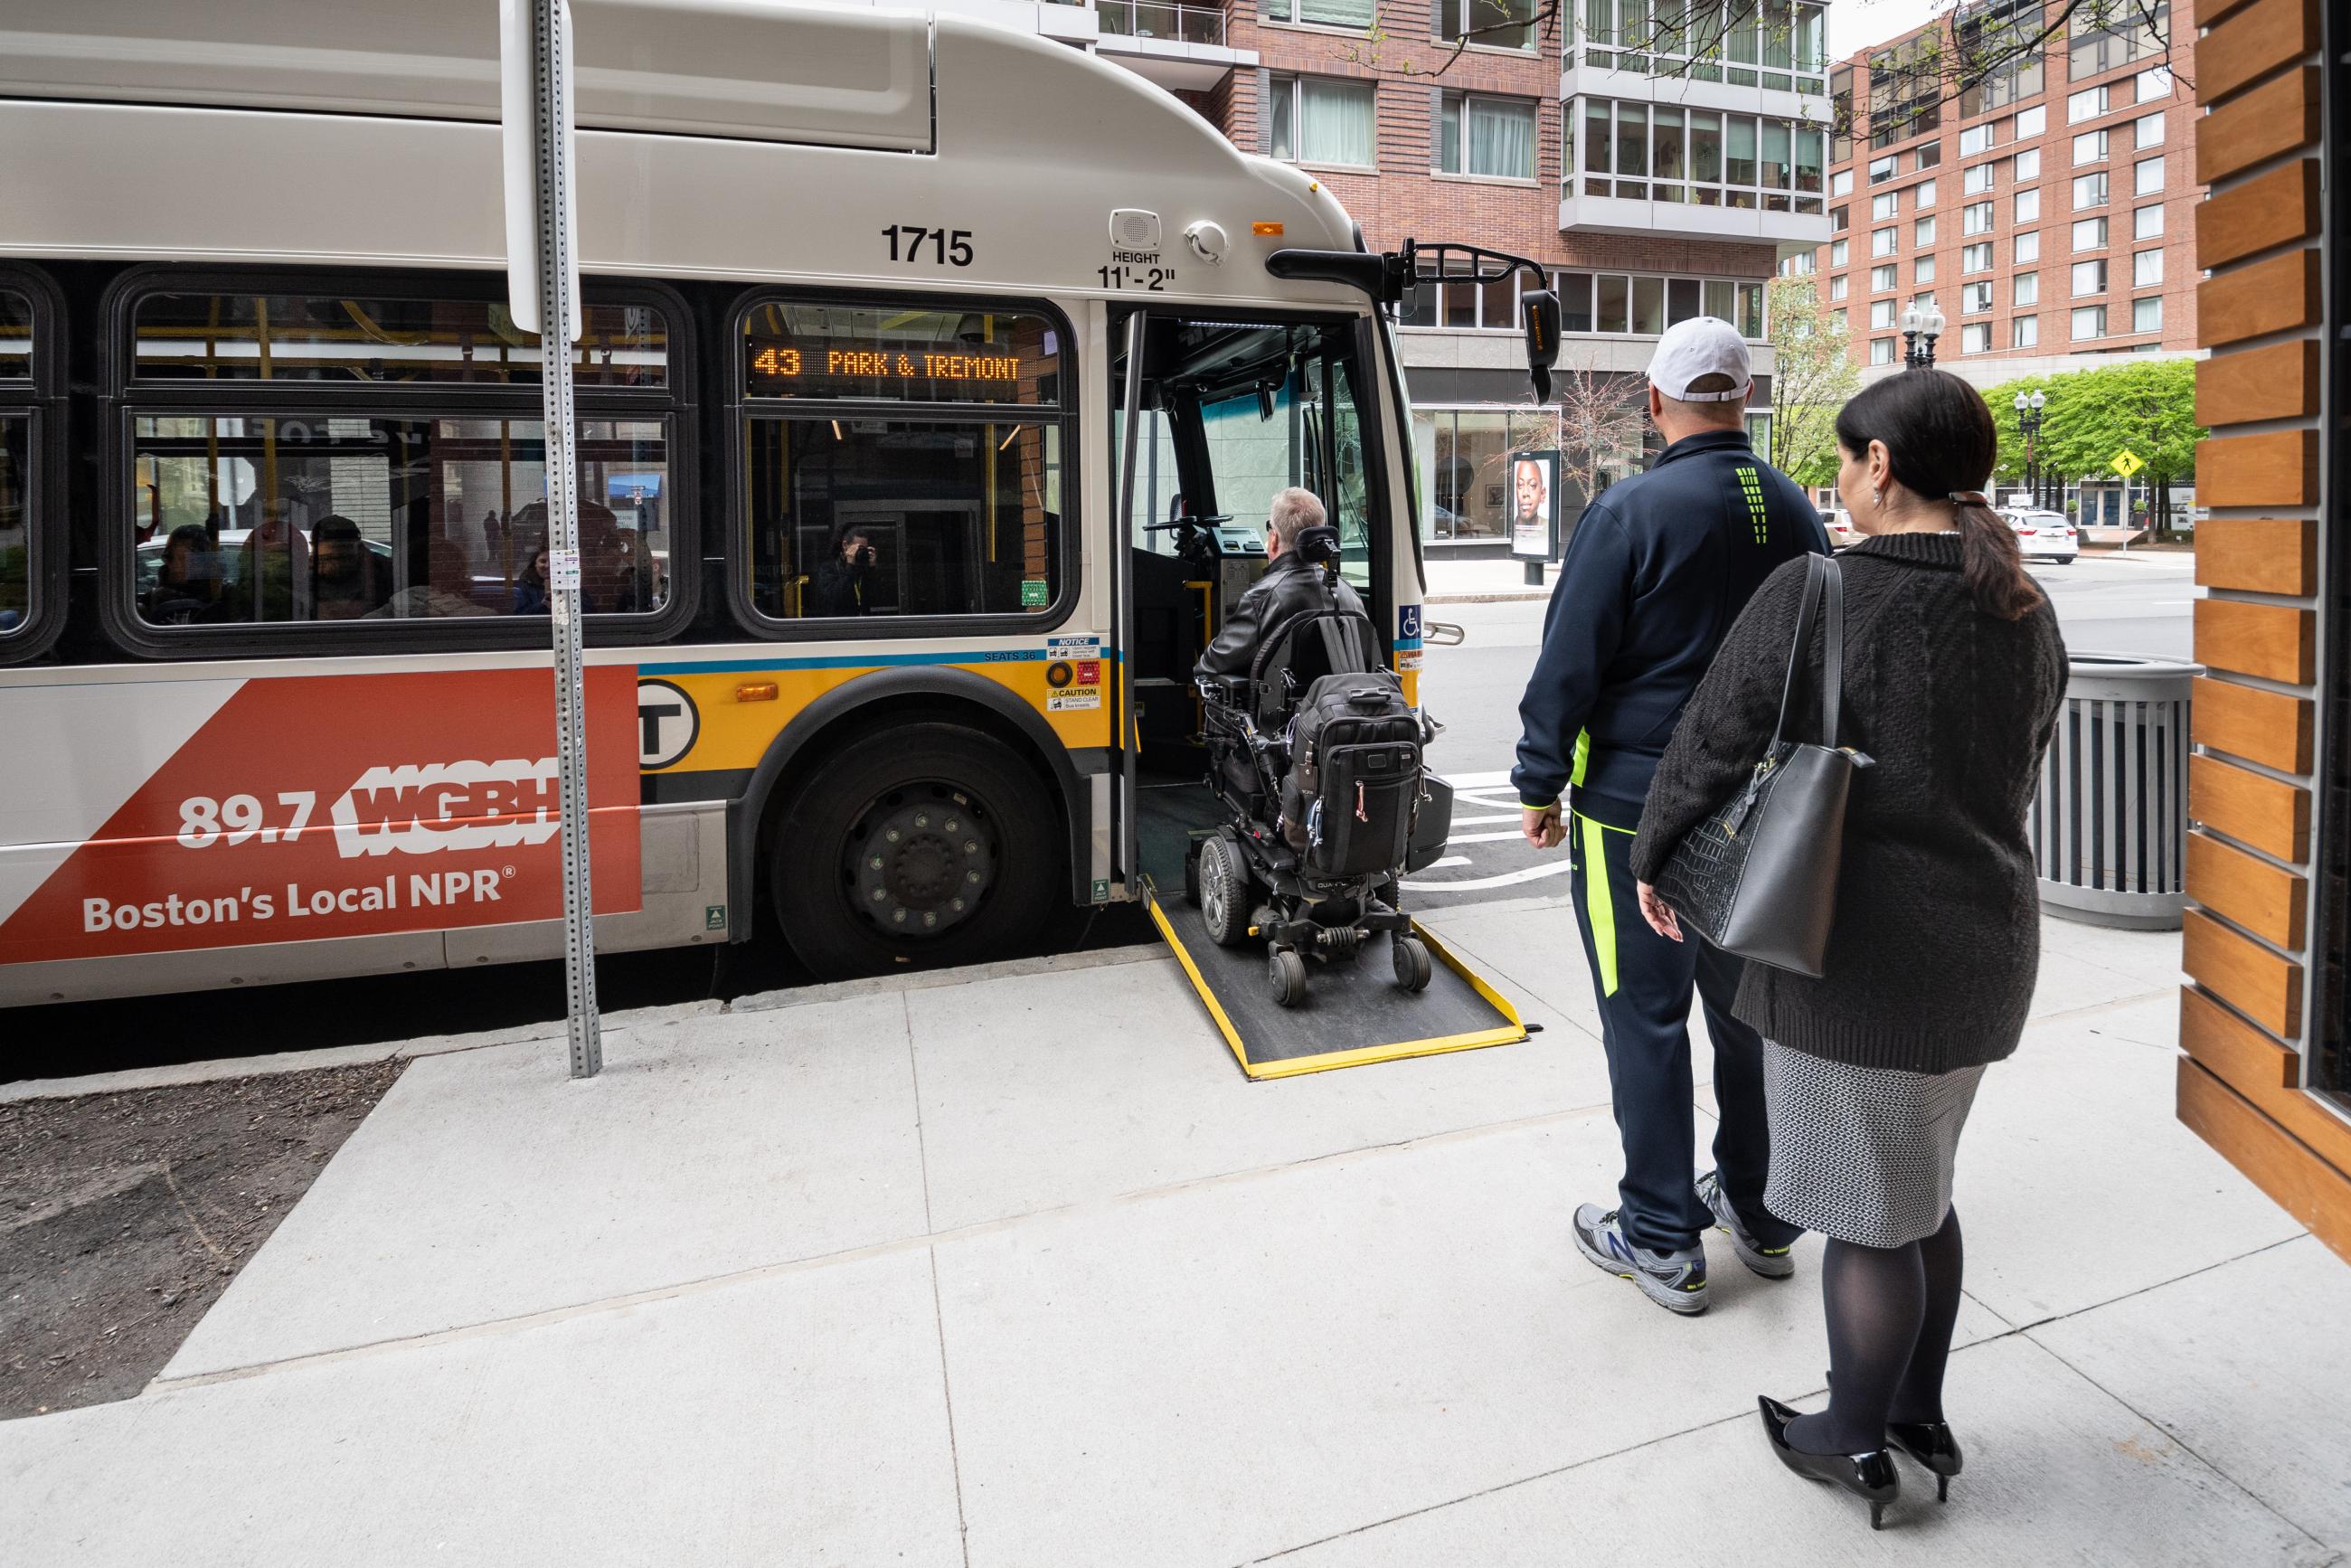 At a bus stop, a rider in a wheeleed mobility device boards the bus via a ramp, as two other riders wait in line behind.